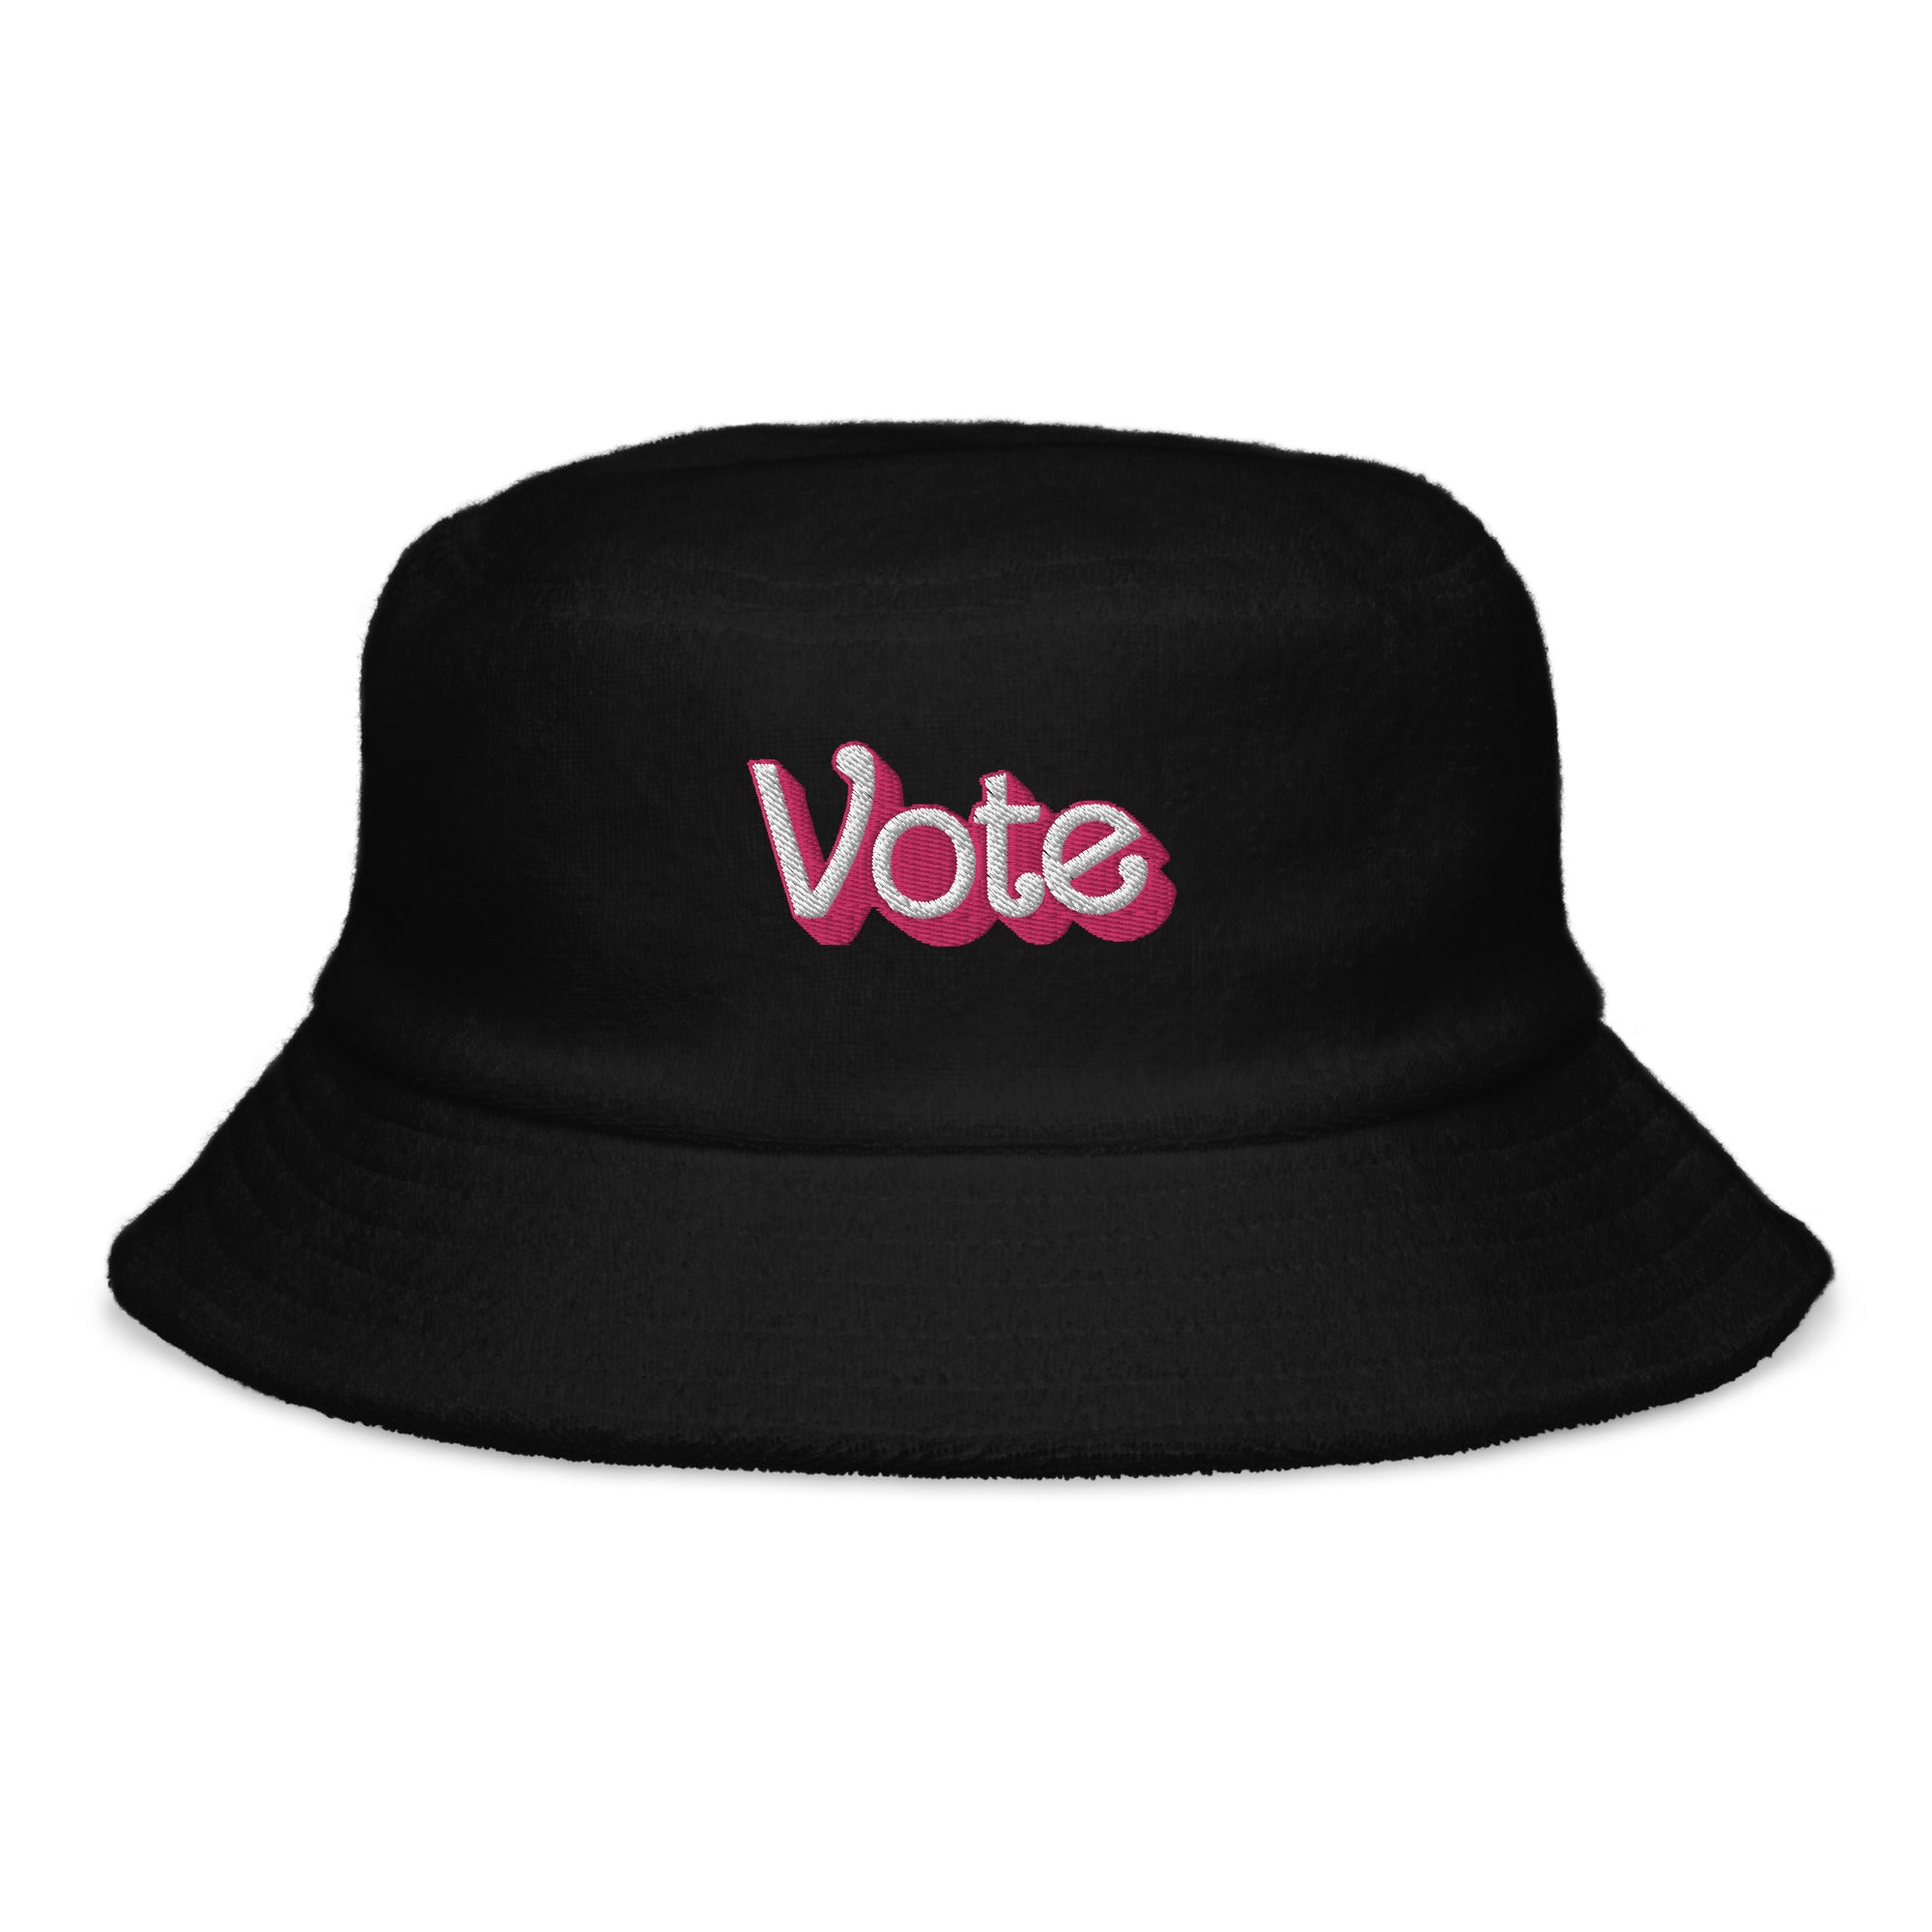 VOTE PINK- Embroidered Terry Cloth Bucket Hat